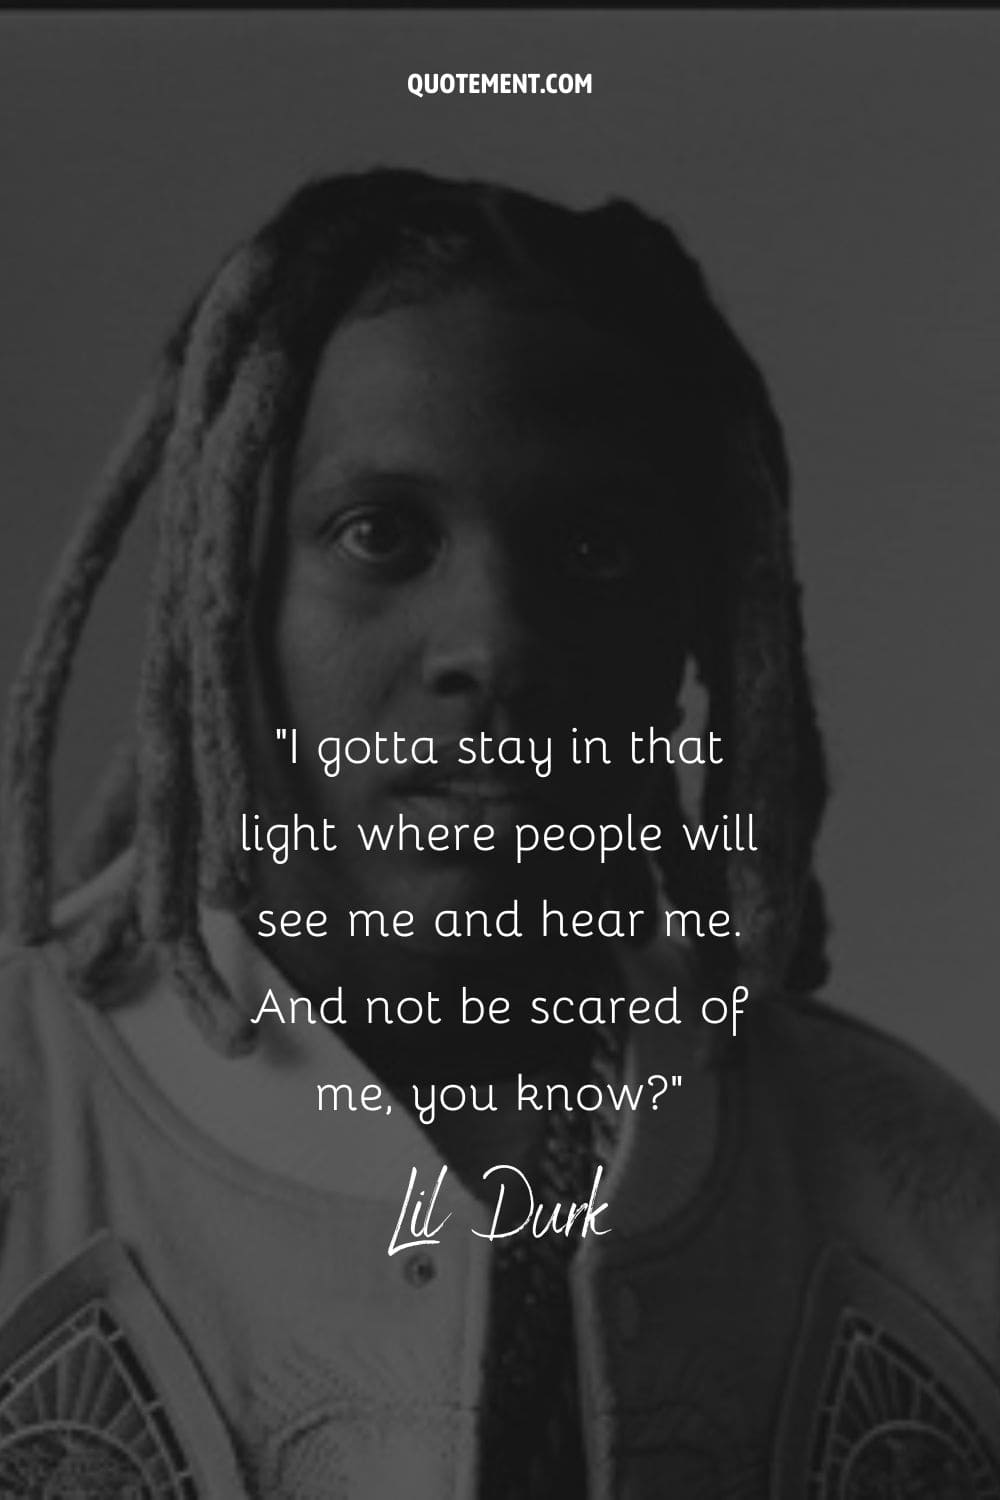 Lil Durk's portrait exuding confidence representing top Lil Durk quote